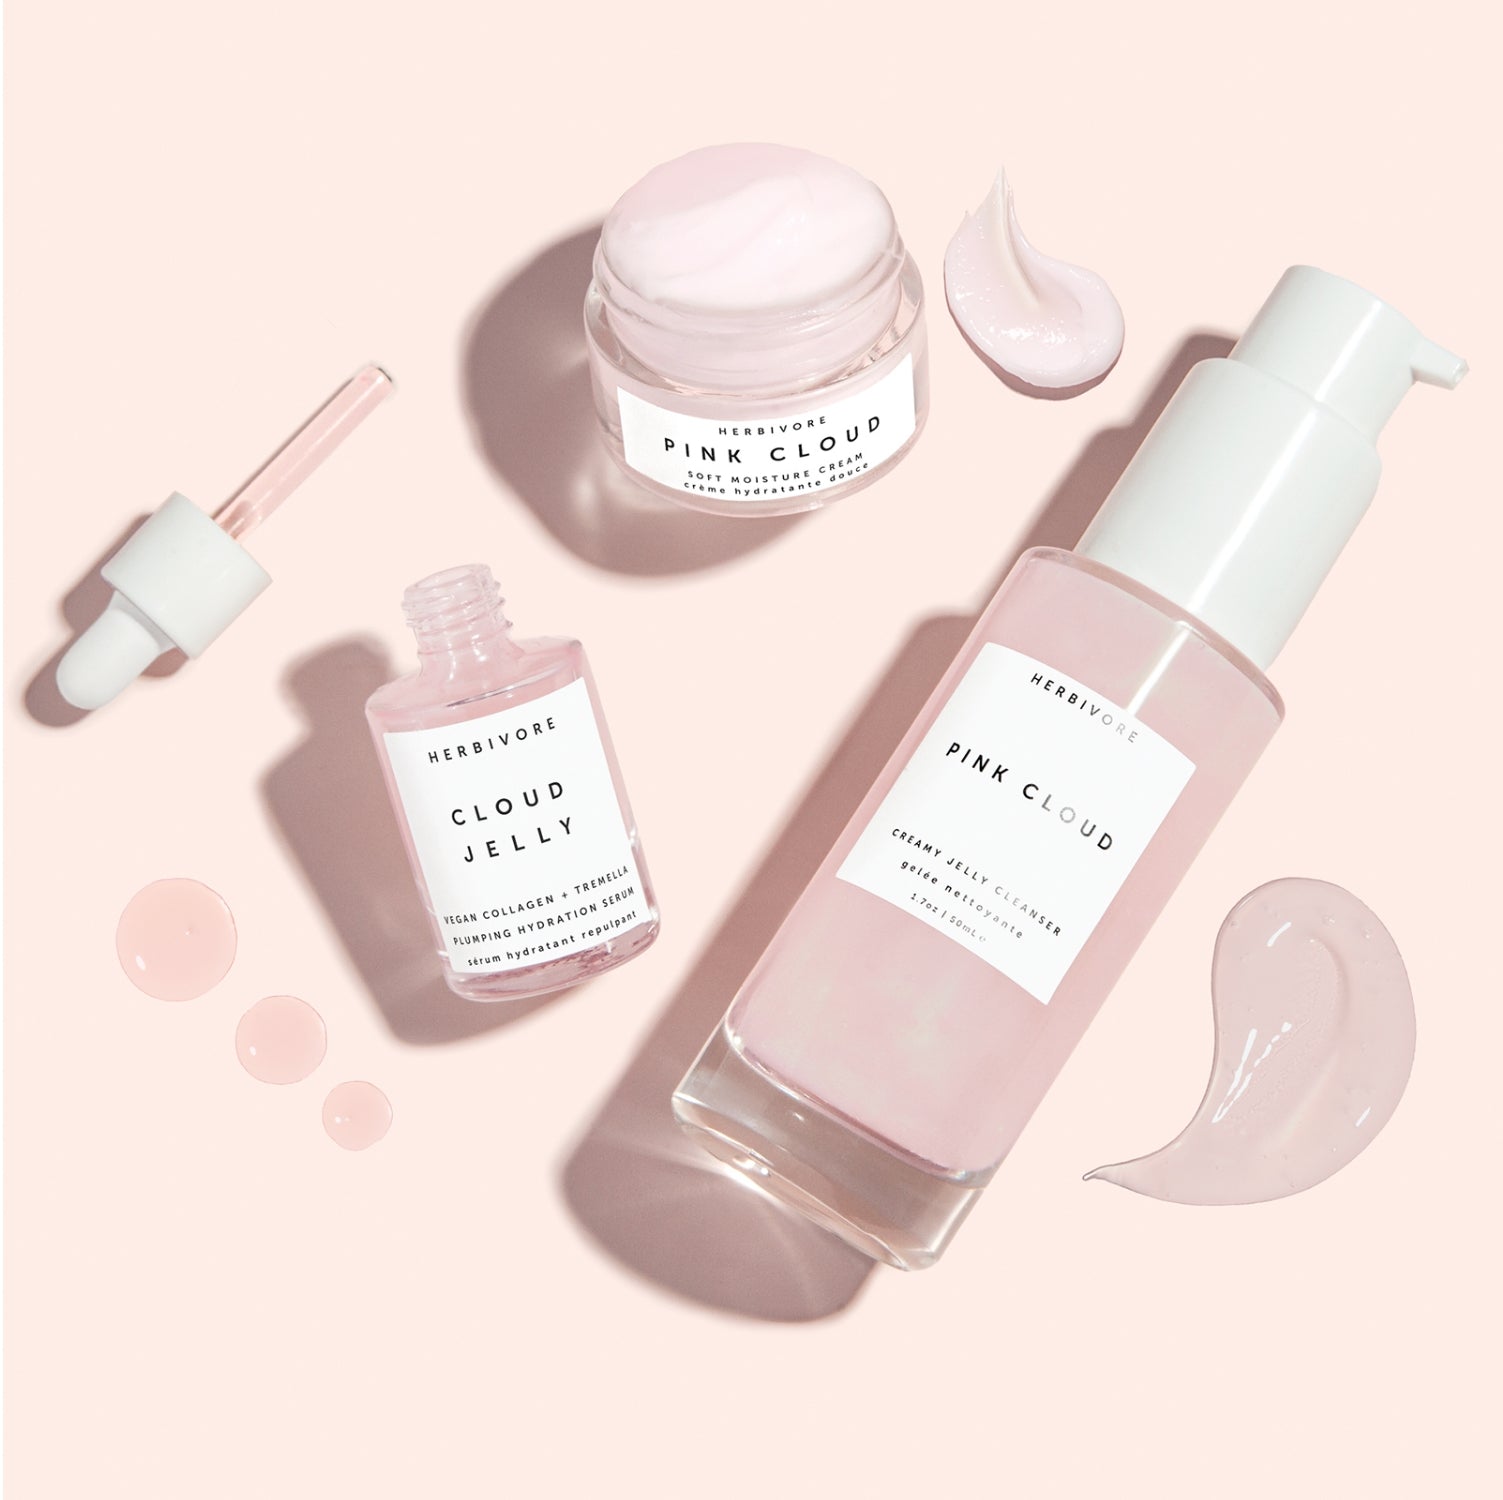 Mini Pink Cloud Cleanser, Cloud Jelly & Pink Cloud Cream on pink background